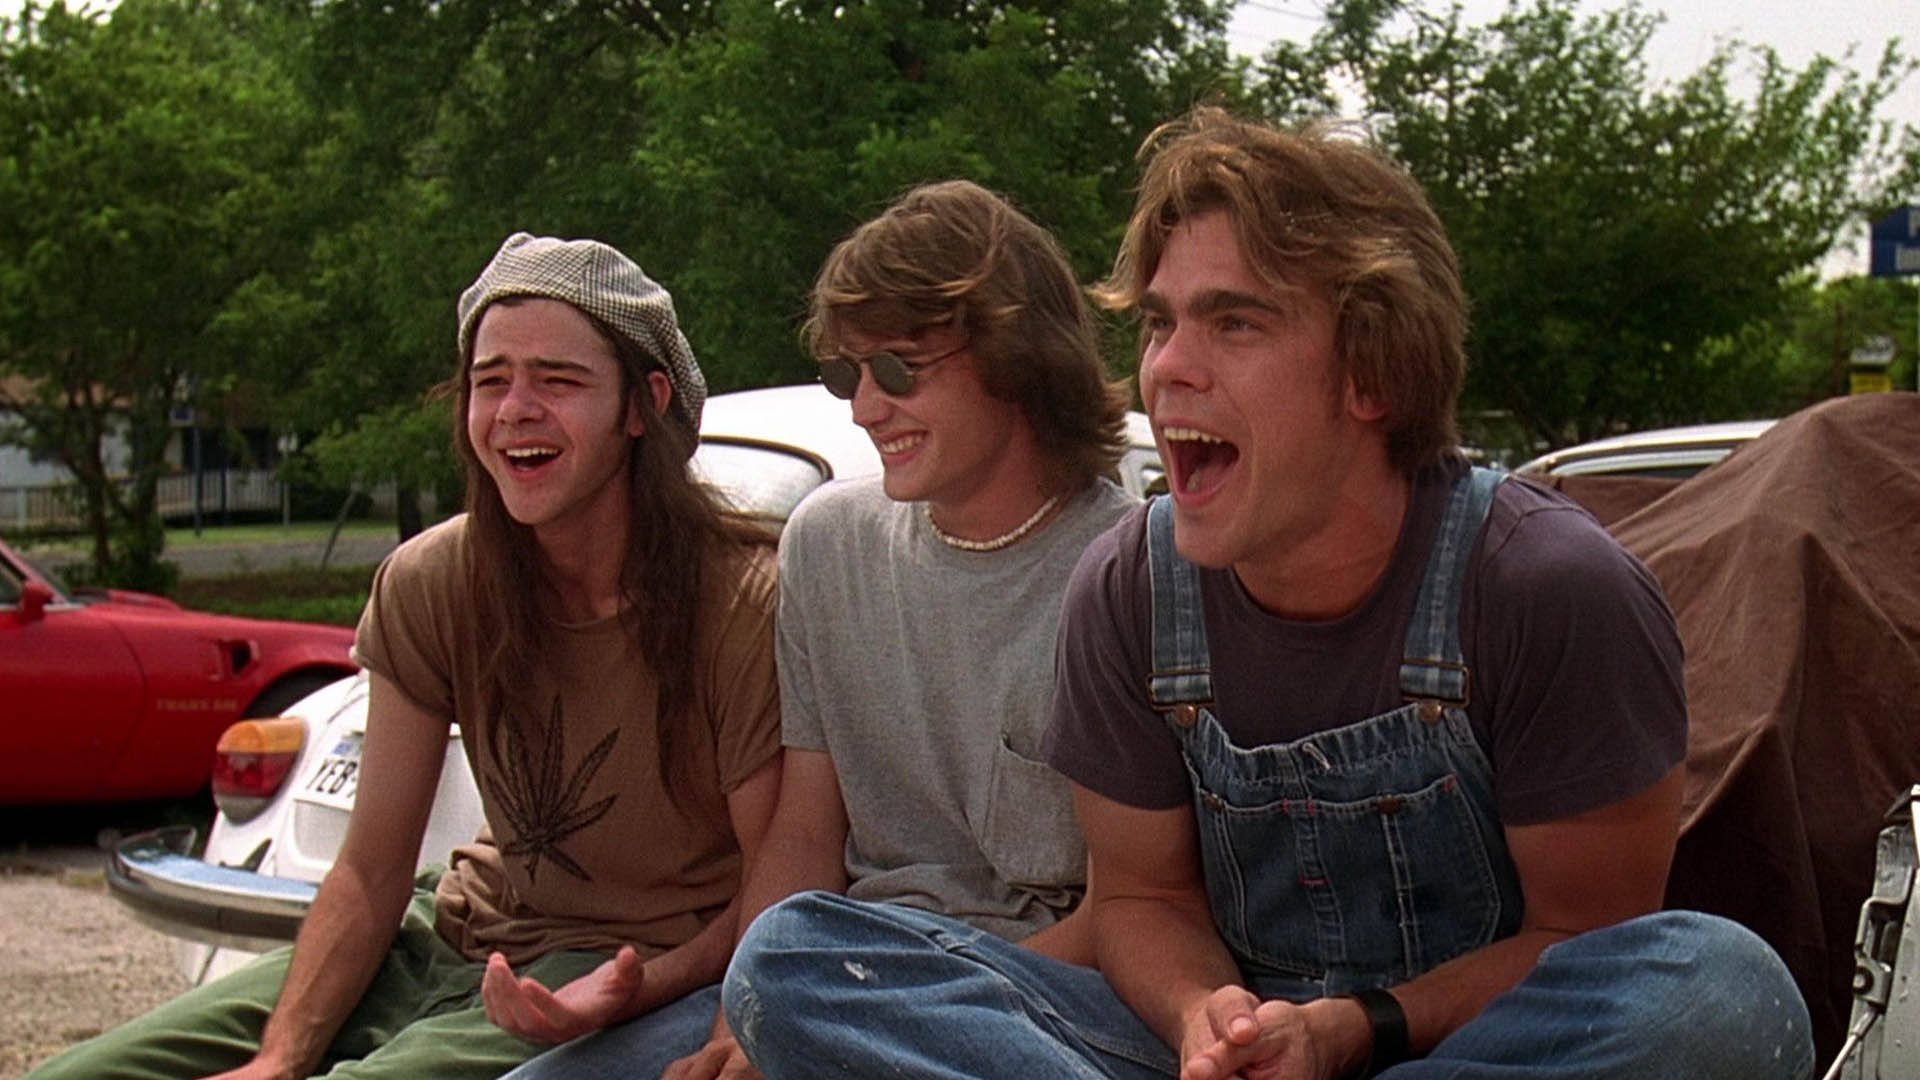 The main characters of Dazed and Confused are laughing